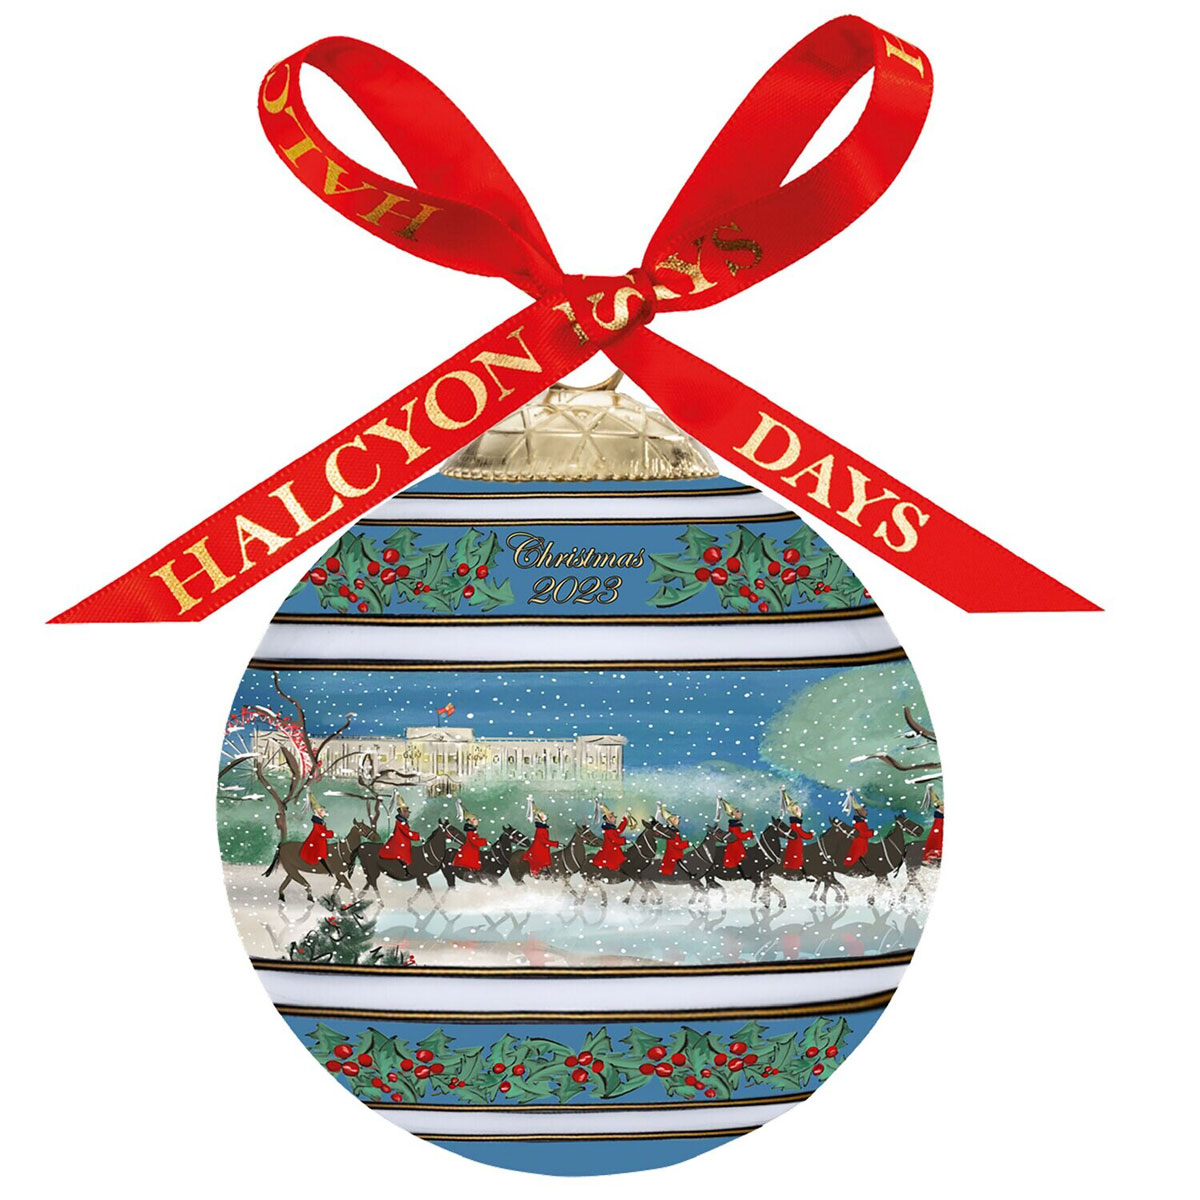 Halcyon Days Life Guards in the Snow Dated Bauble Ornament